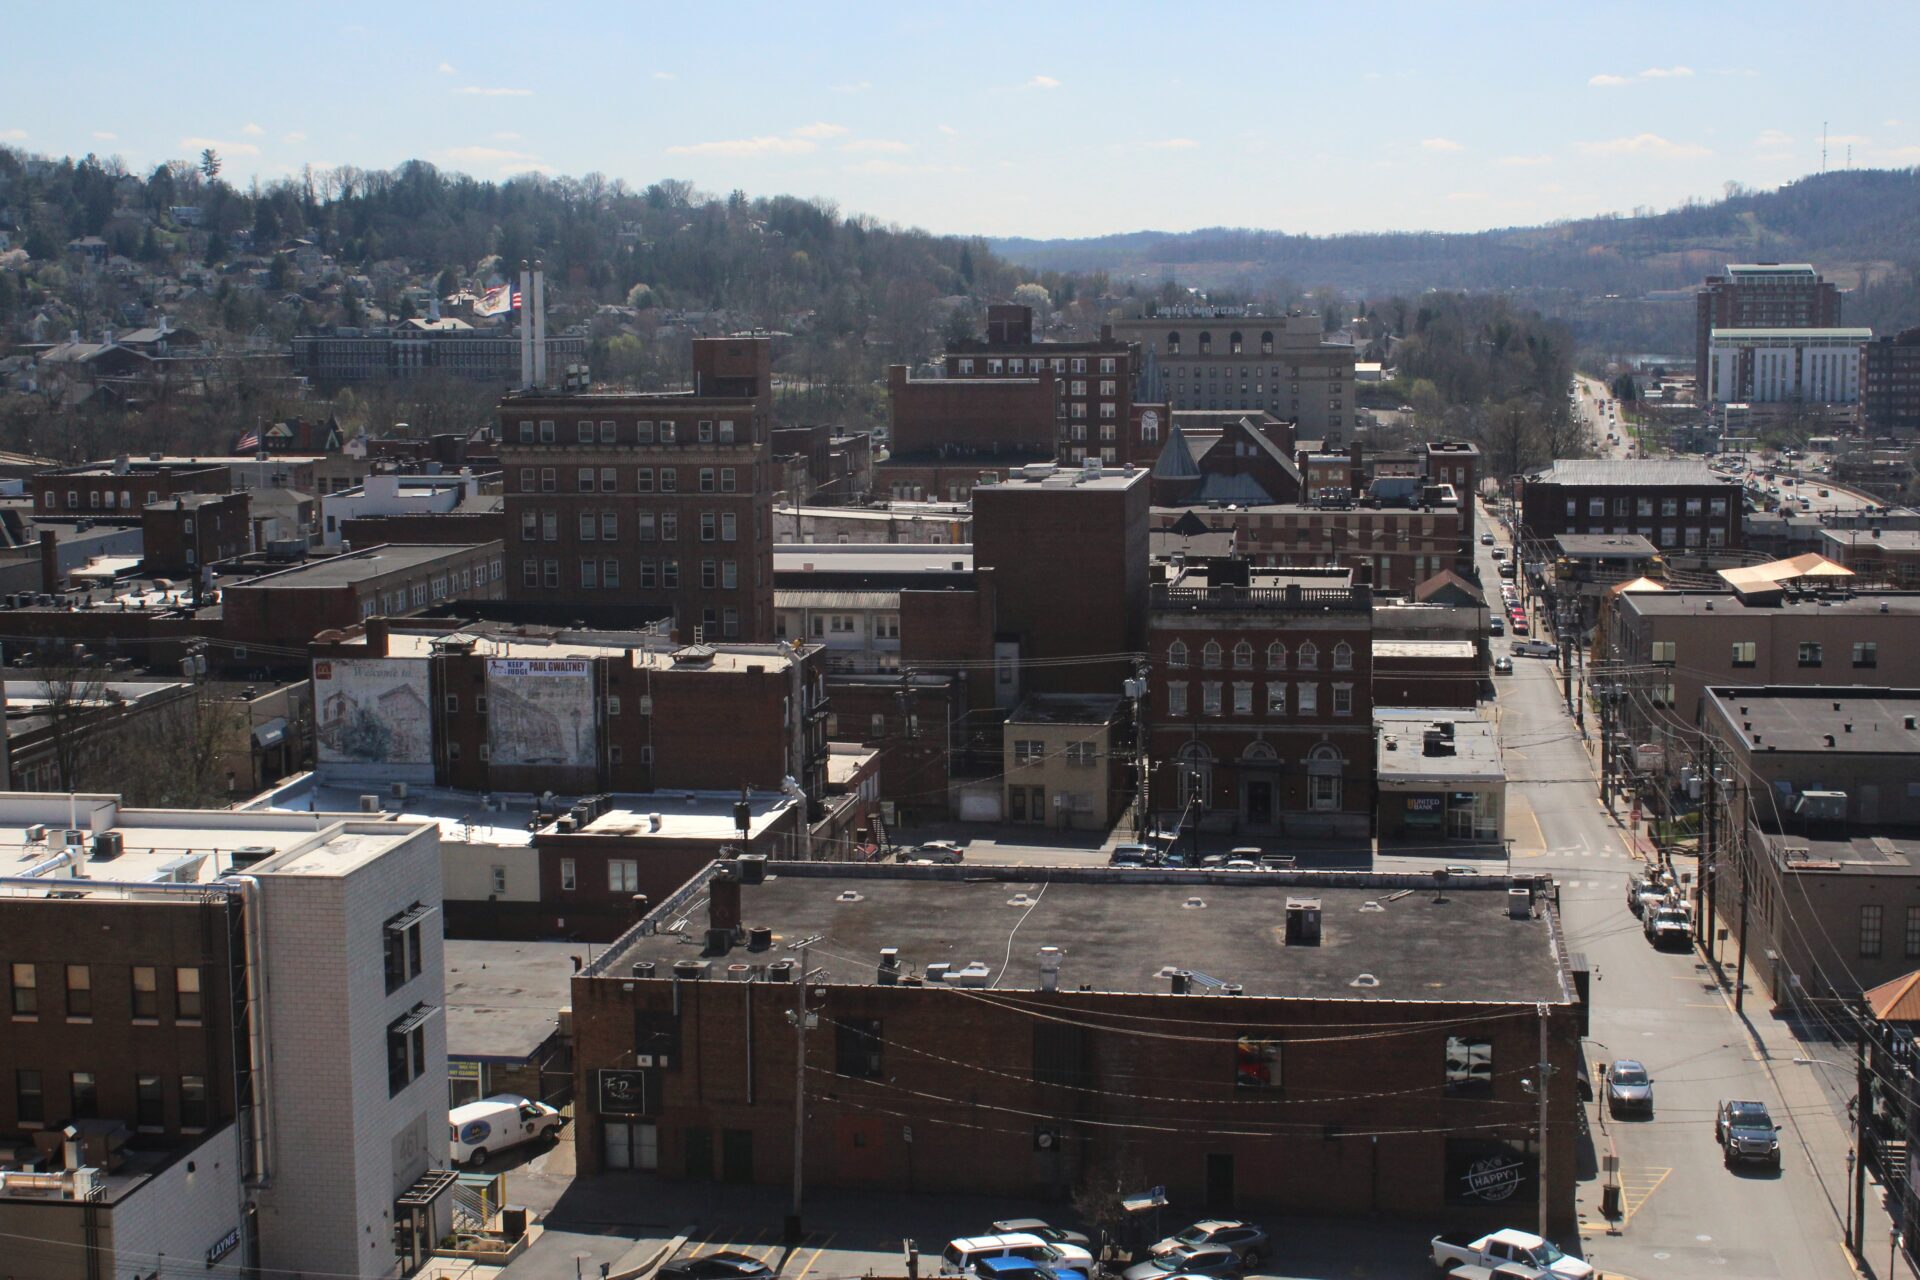 A view of downtown Morgantown is taken from inside of the West Virginia University astronomical observatory. Streets can be seen stretching away into frame around squat brick buildings. In the top right of frame can be seen a hint of the Monongahela River with the Morgantown Marriot tower in front. A white brick building with "Hotel Morgan" lettering can be seen in the middle background. A wooded ridge rises in the background, with houses dotting the hillside that slopes into downtown visible in the left background.